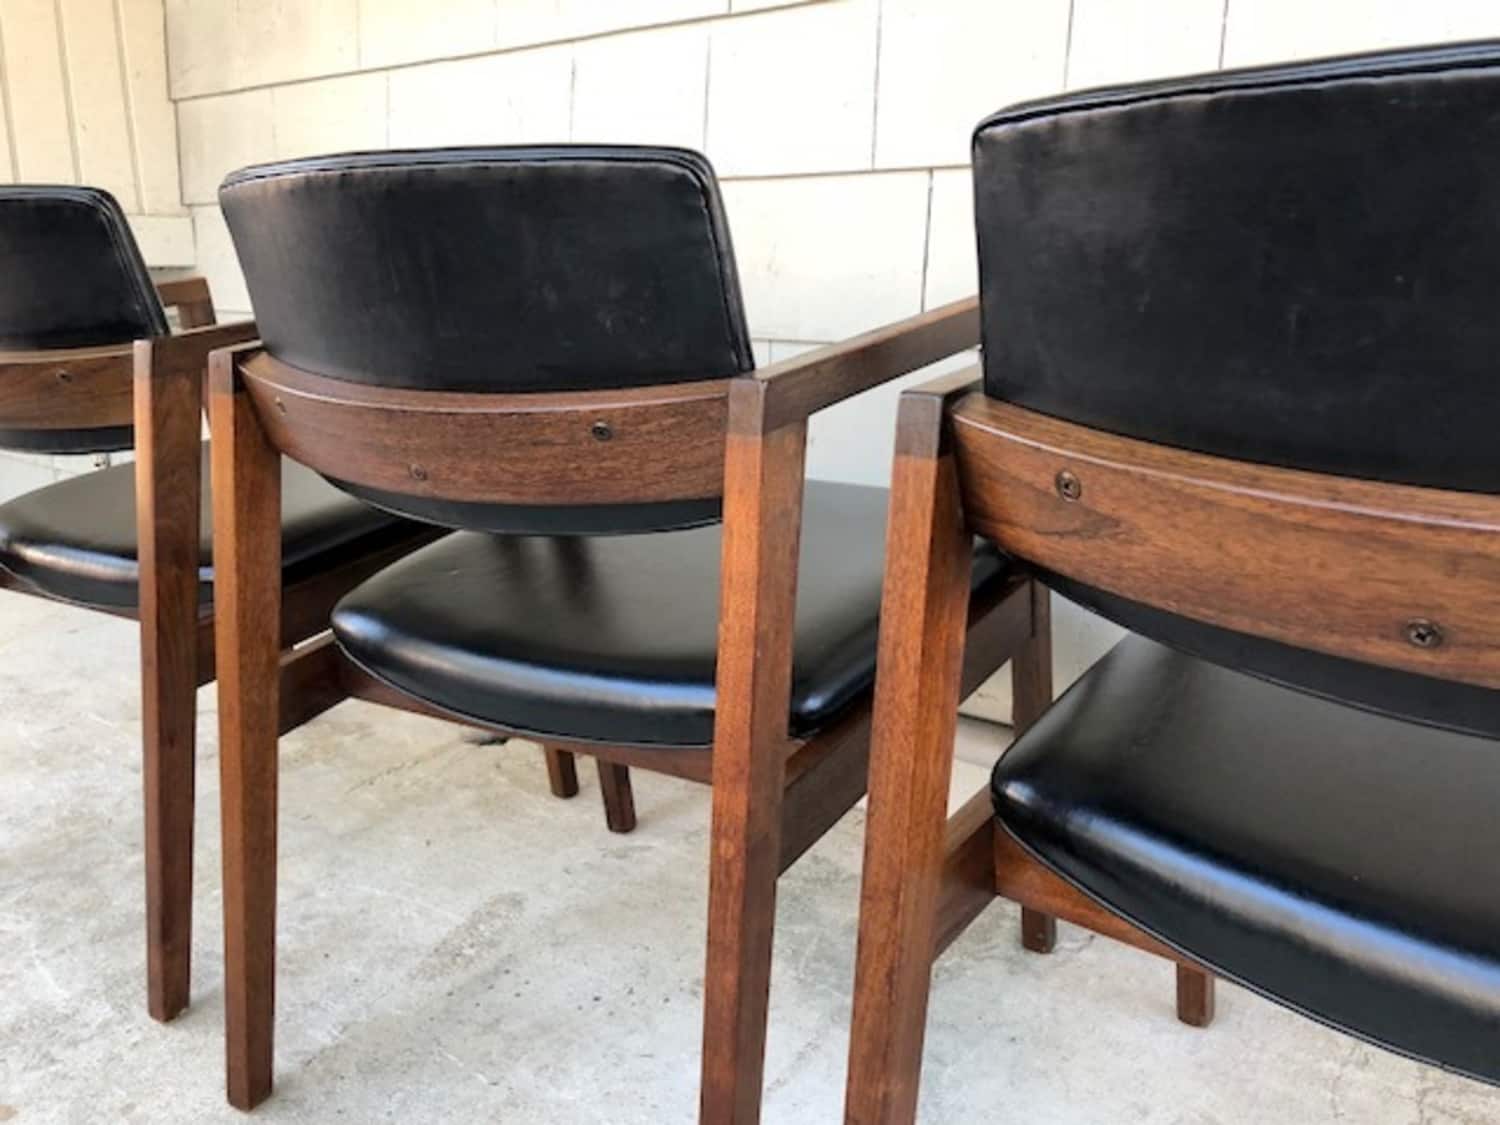 Midcentury Arm/Lounge Chairs by Gunlocke - Apartment Therapy's Bazaar.